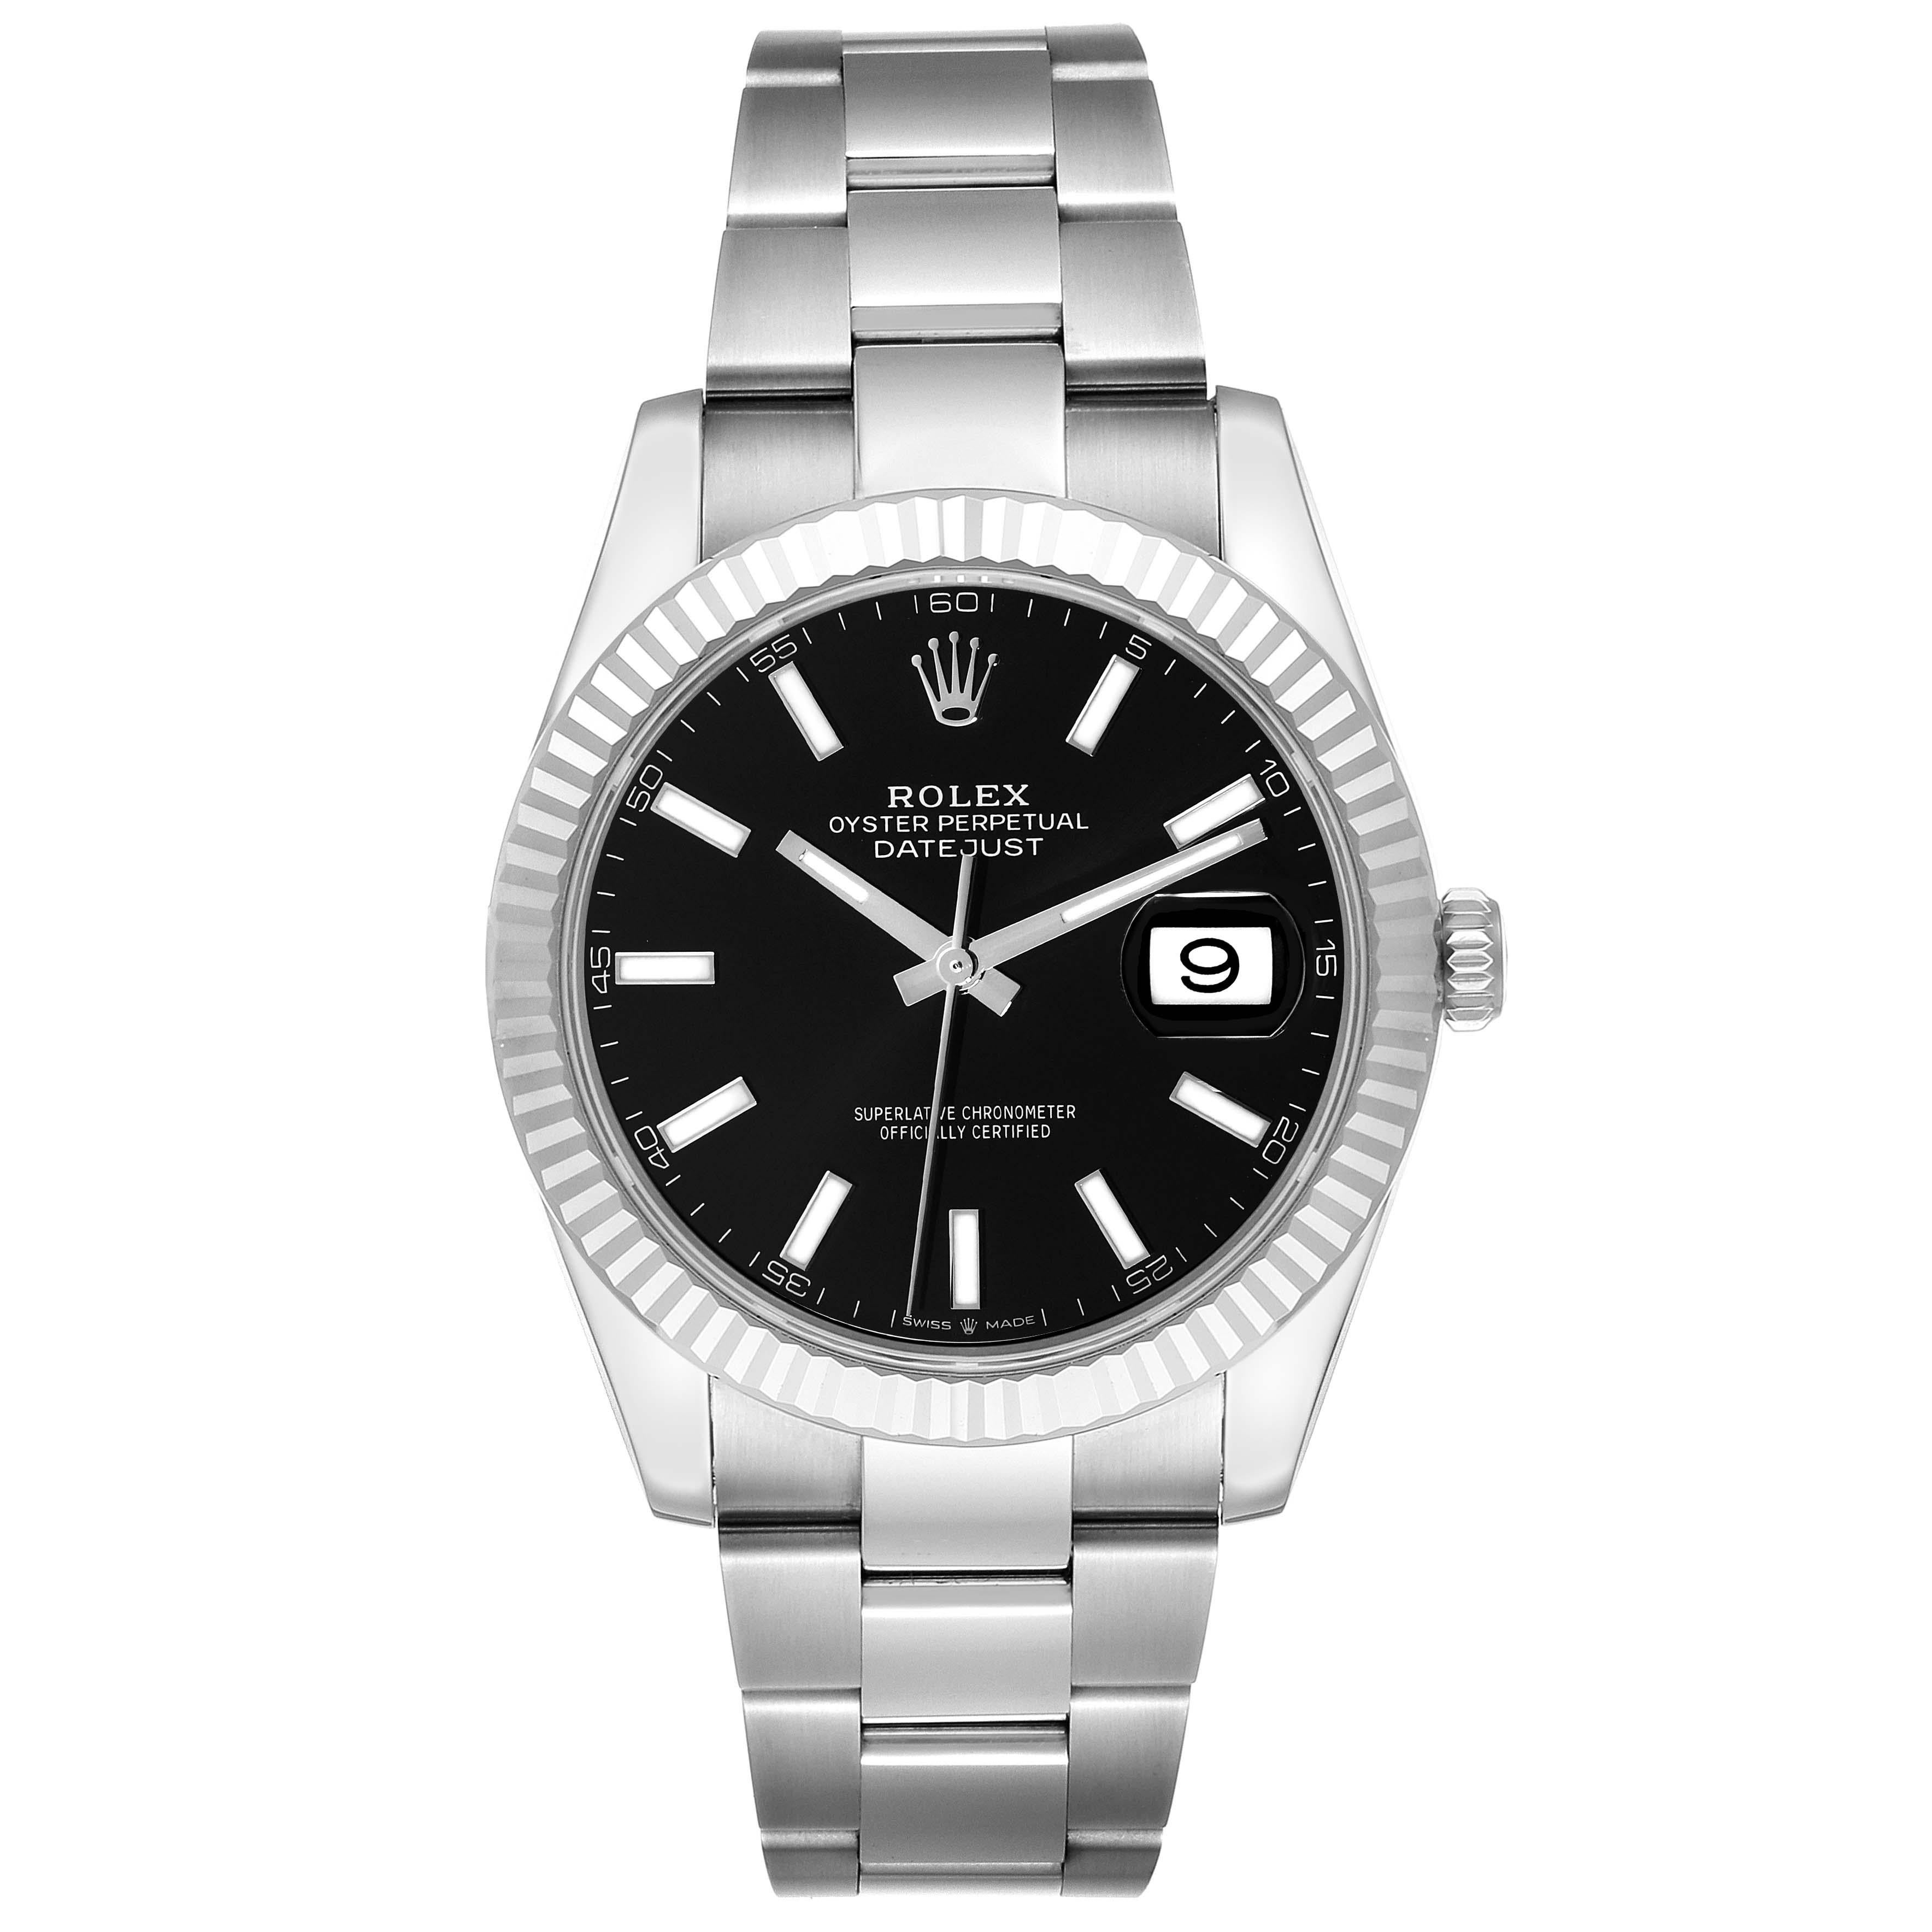 Rolex Datejust 41 Steel White Gold Black Dial Mens Watch 126334 Box Card. Officially certified chronometer automatic self-winding movement. Stainless steel case 41 mm in diameter. Rolex logo on the crown. 18K white gold fluted bezel. Scratch